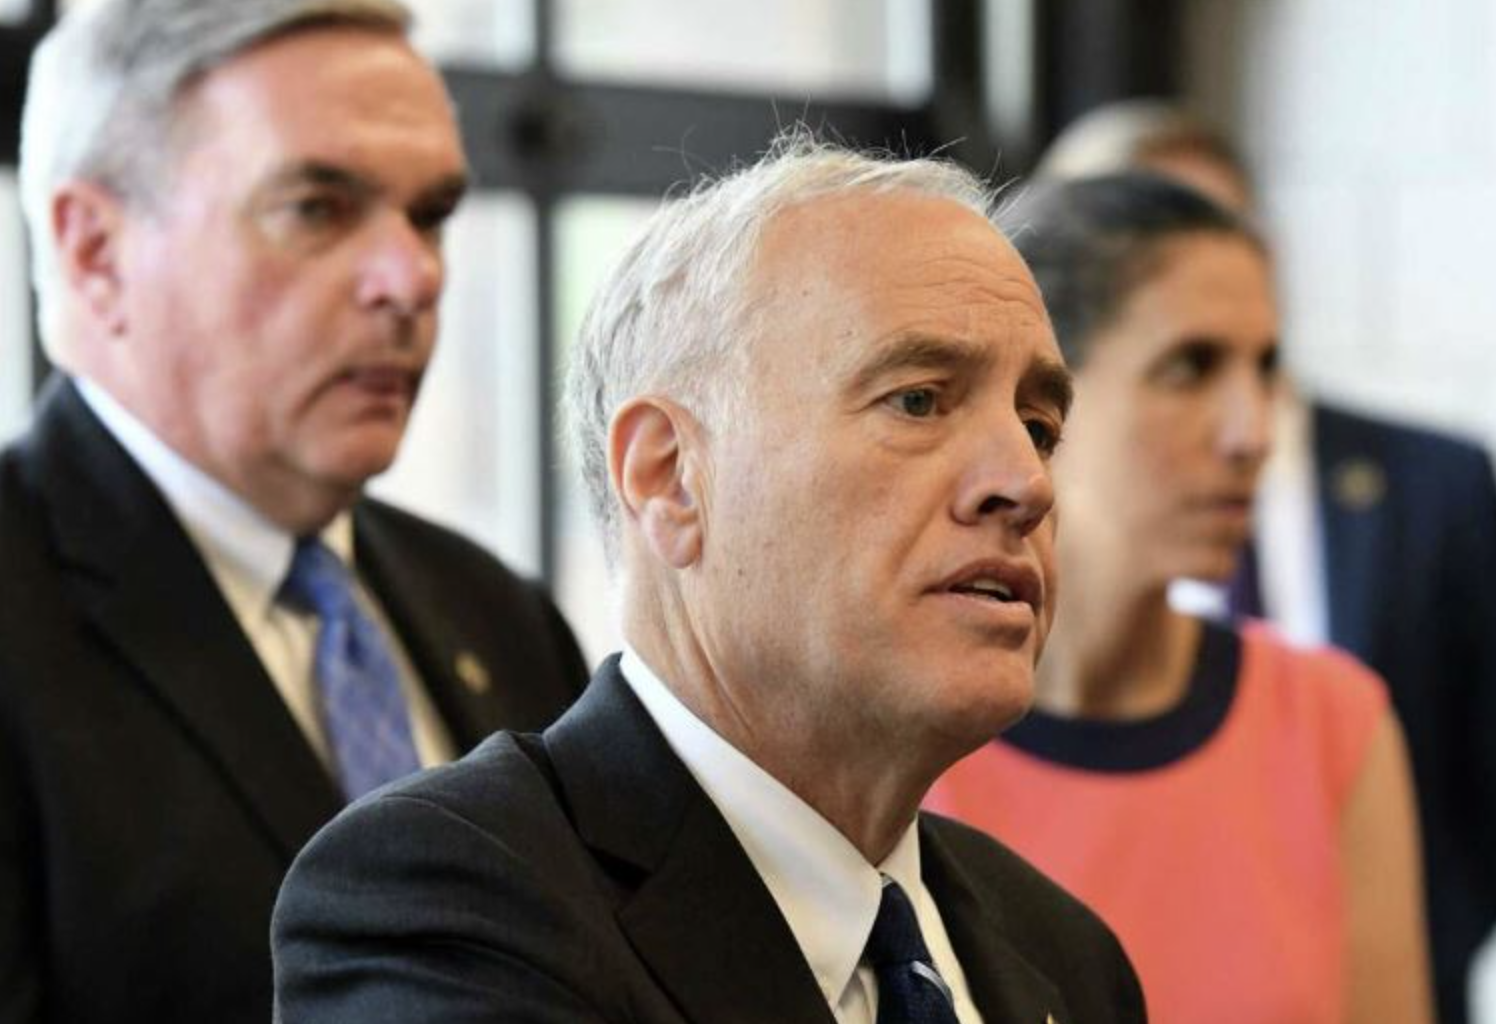 Outmigration hurting state tax revenue, DiNapoli says